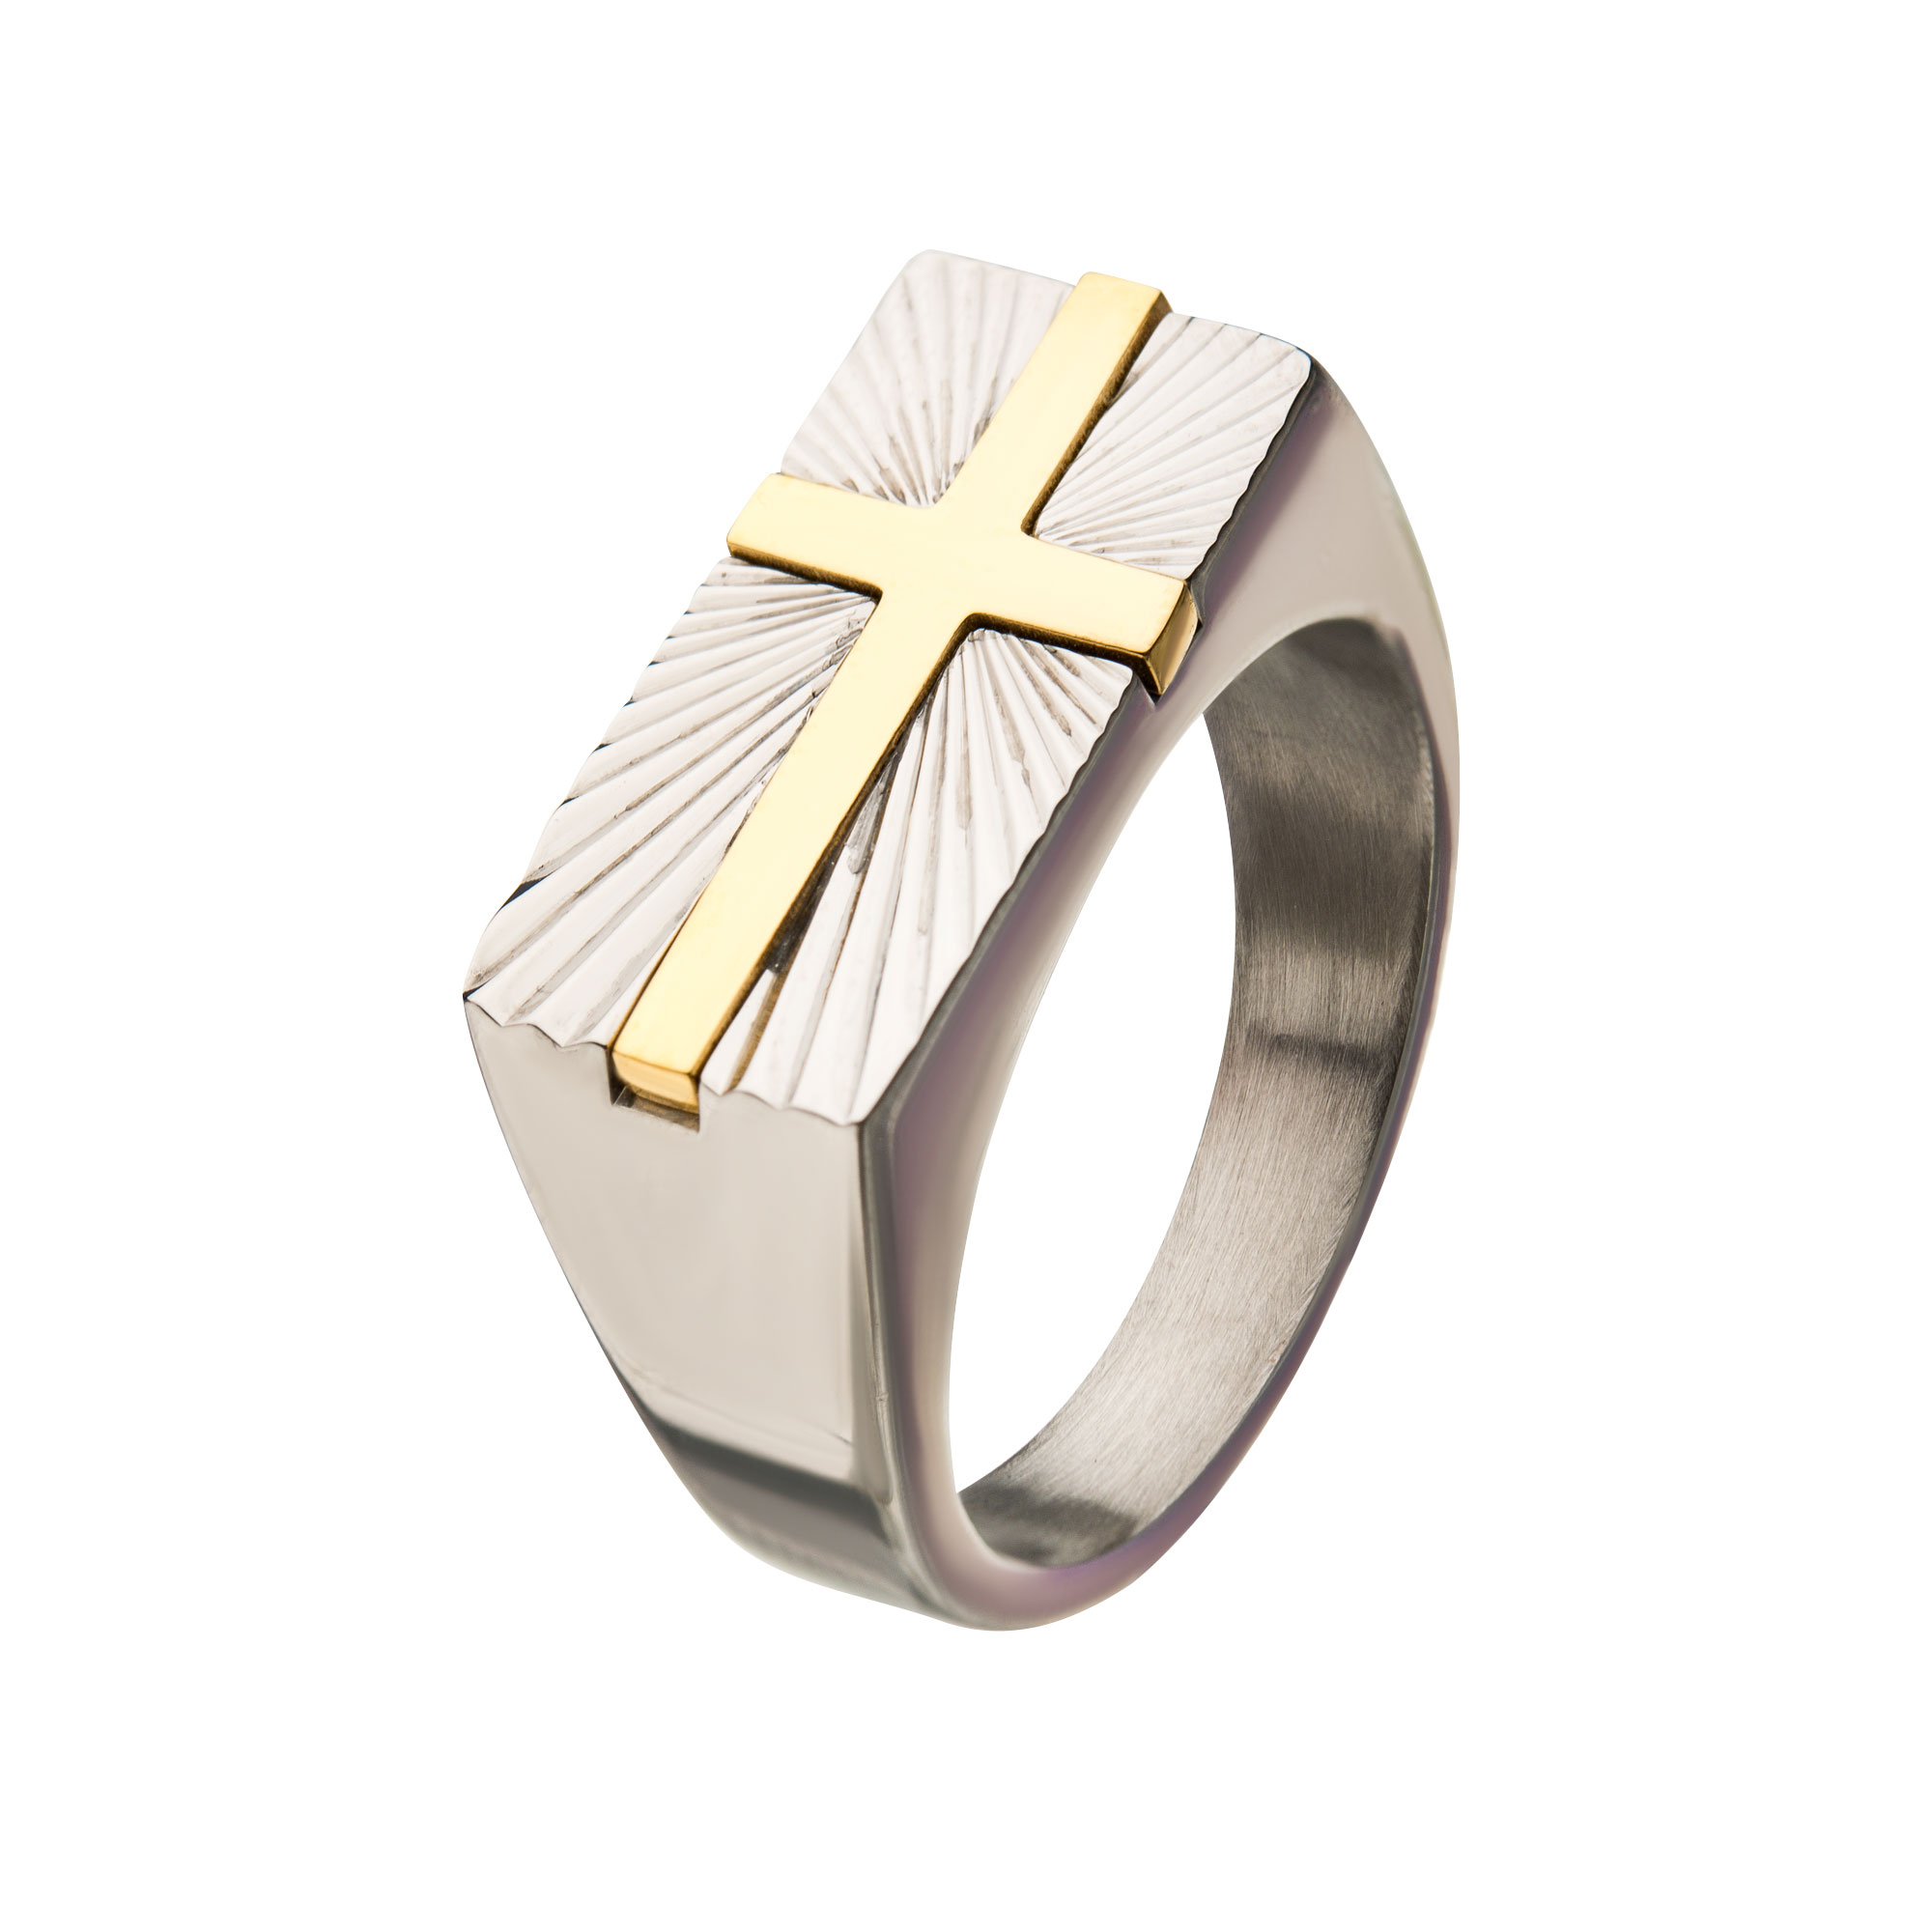 Stainless Steel with  Gold Plated Transfiguration Cross Ring P.K. Bennett Jewelers Mundelein, IL